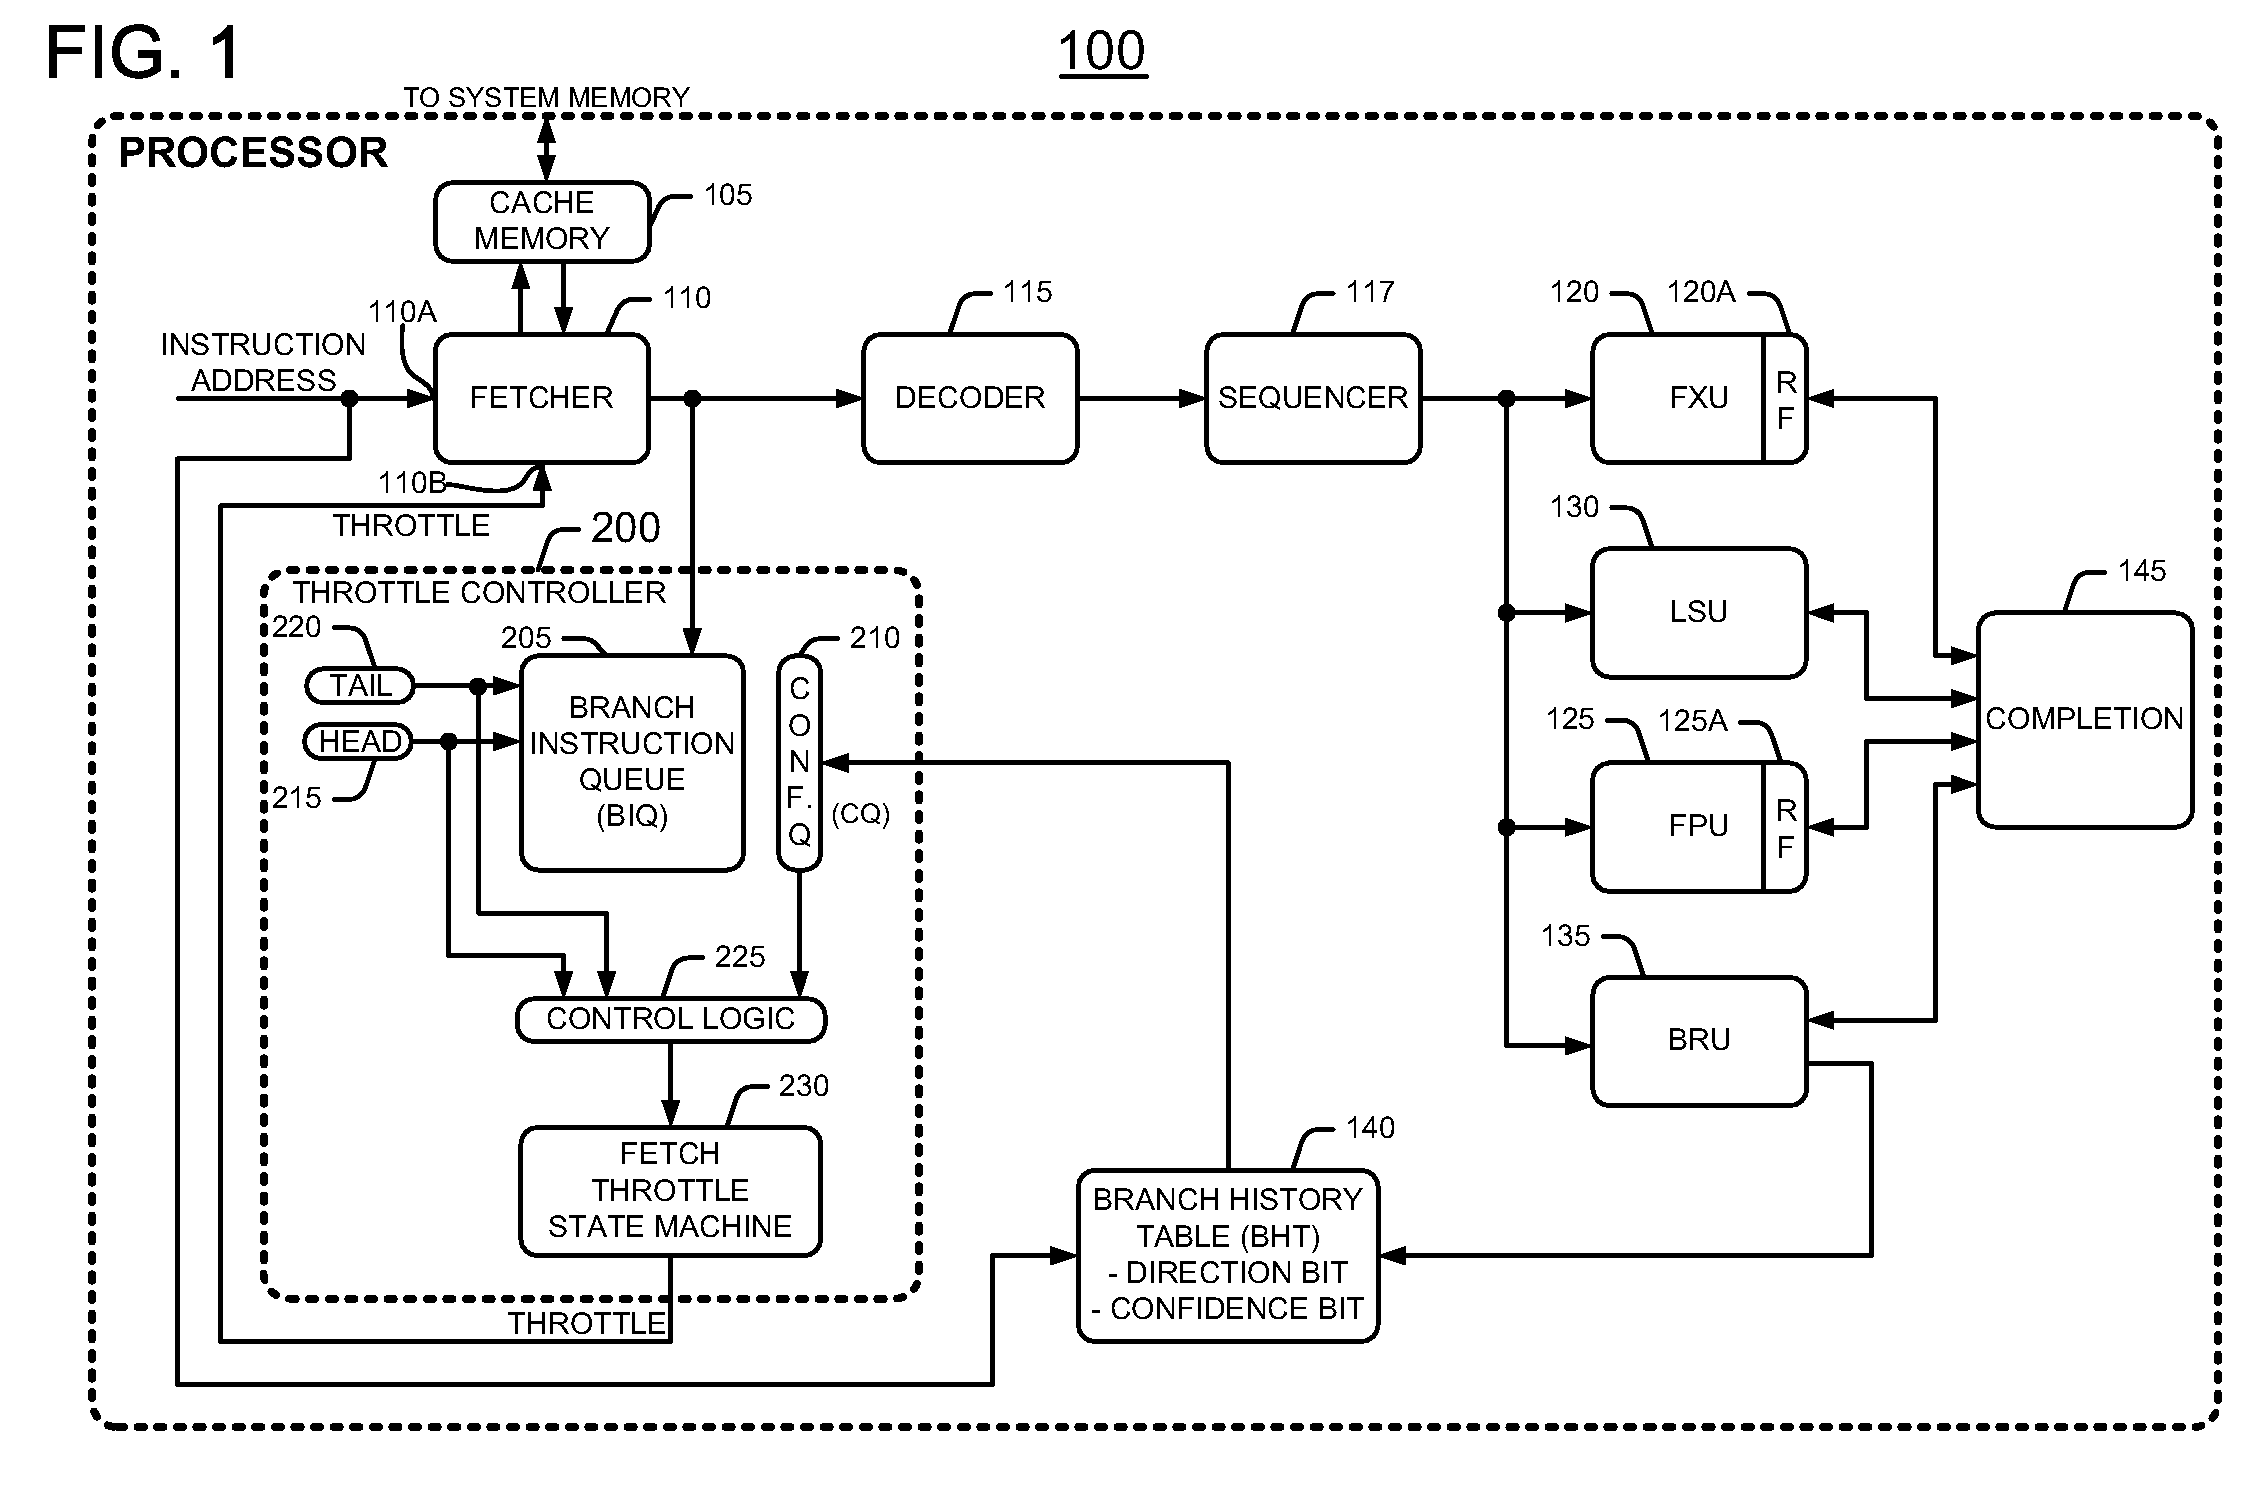 Method and apparatus for conserving power by throttling instruction fetching when a processor encounters low confidence branches in an information handling system